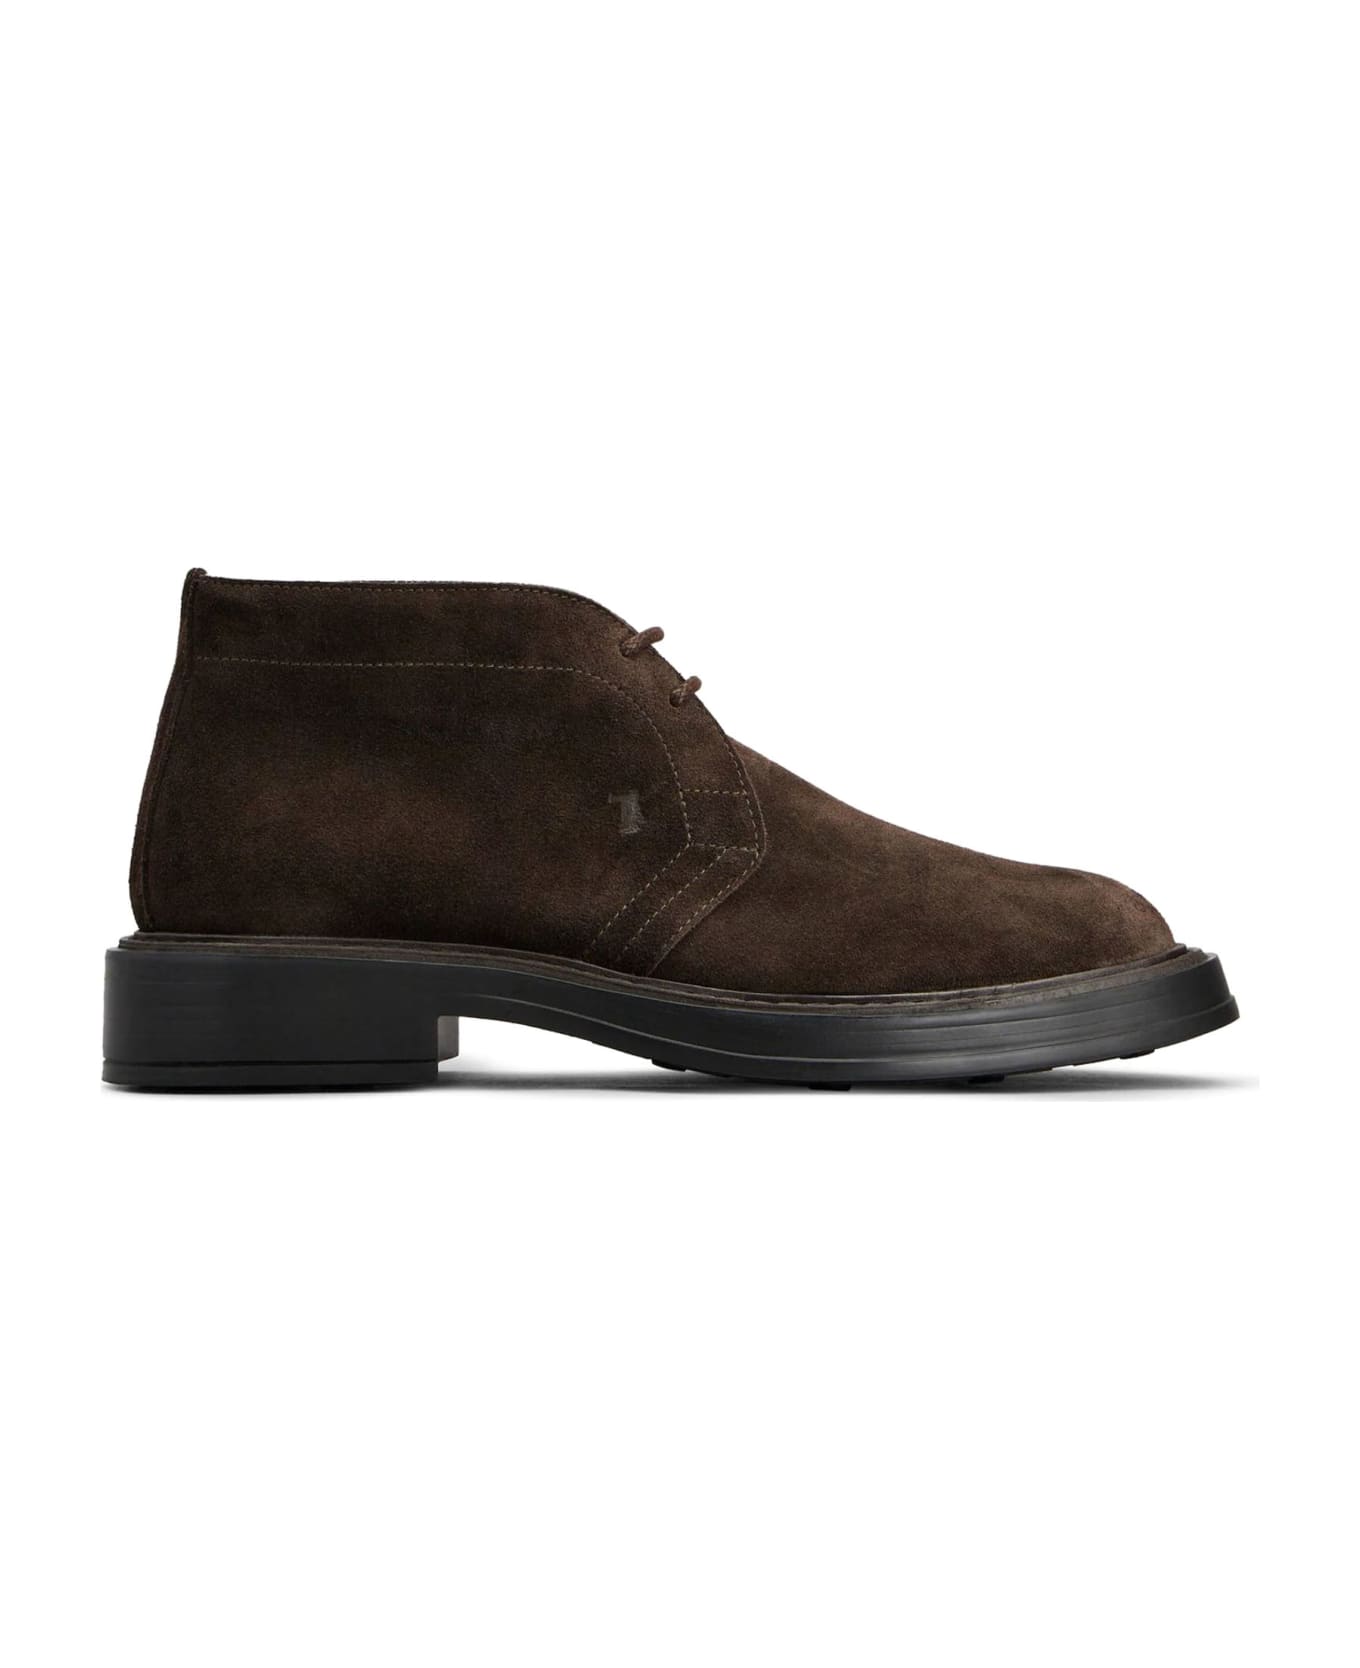 Tod's Desert Boots In Brown Suede - Brown